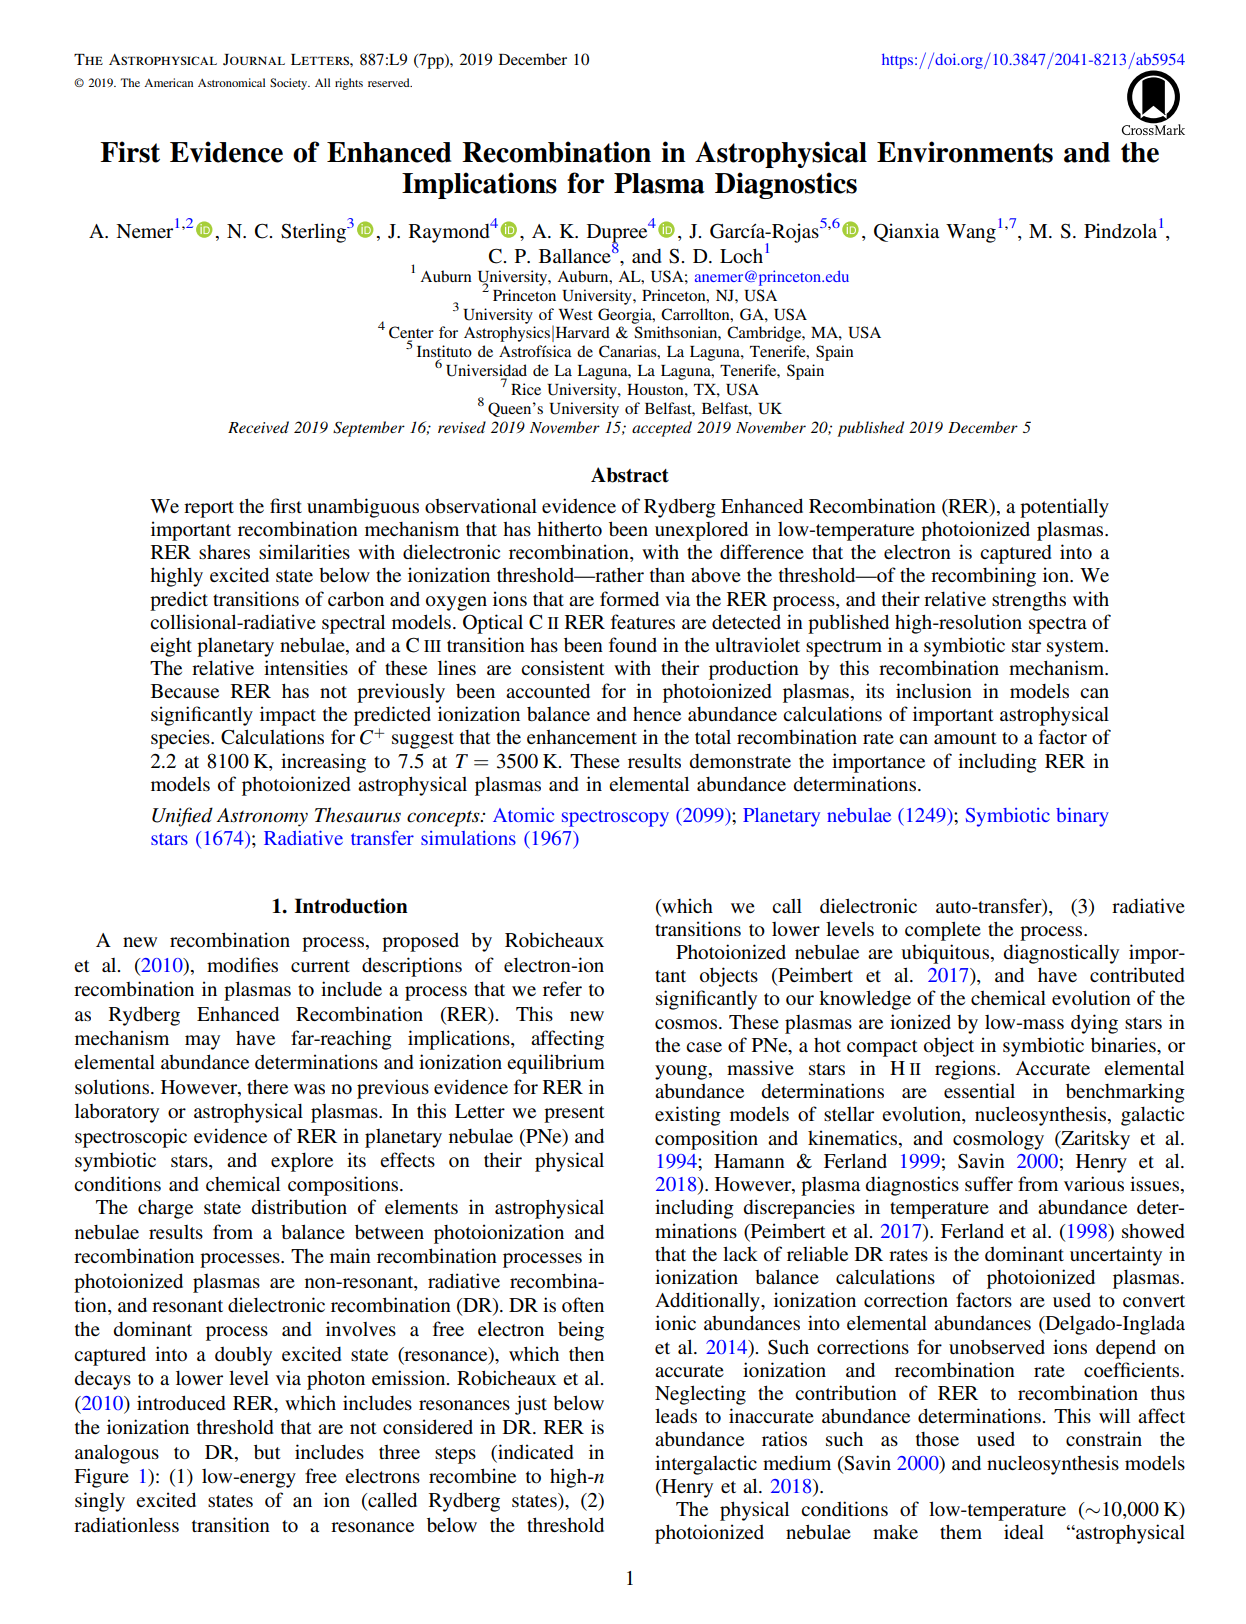 image of paper published